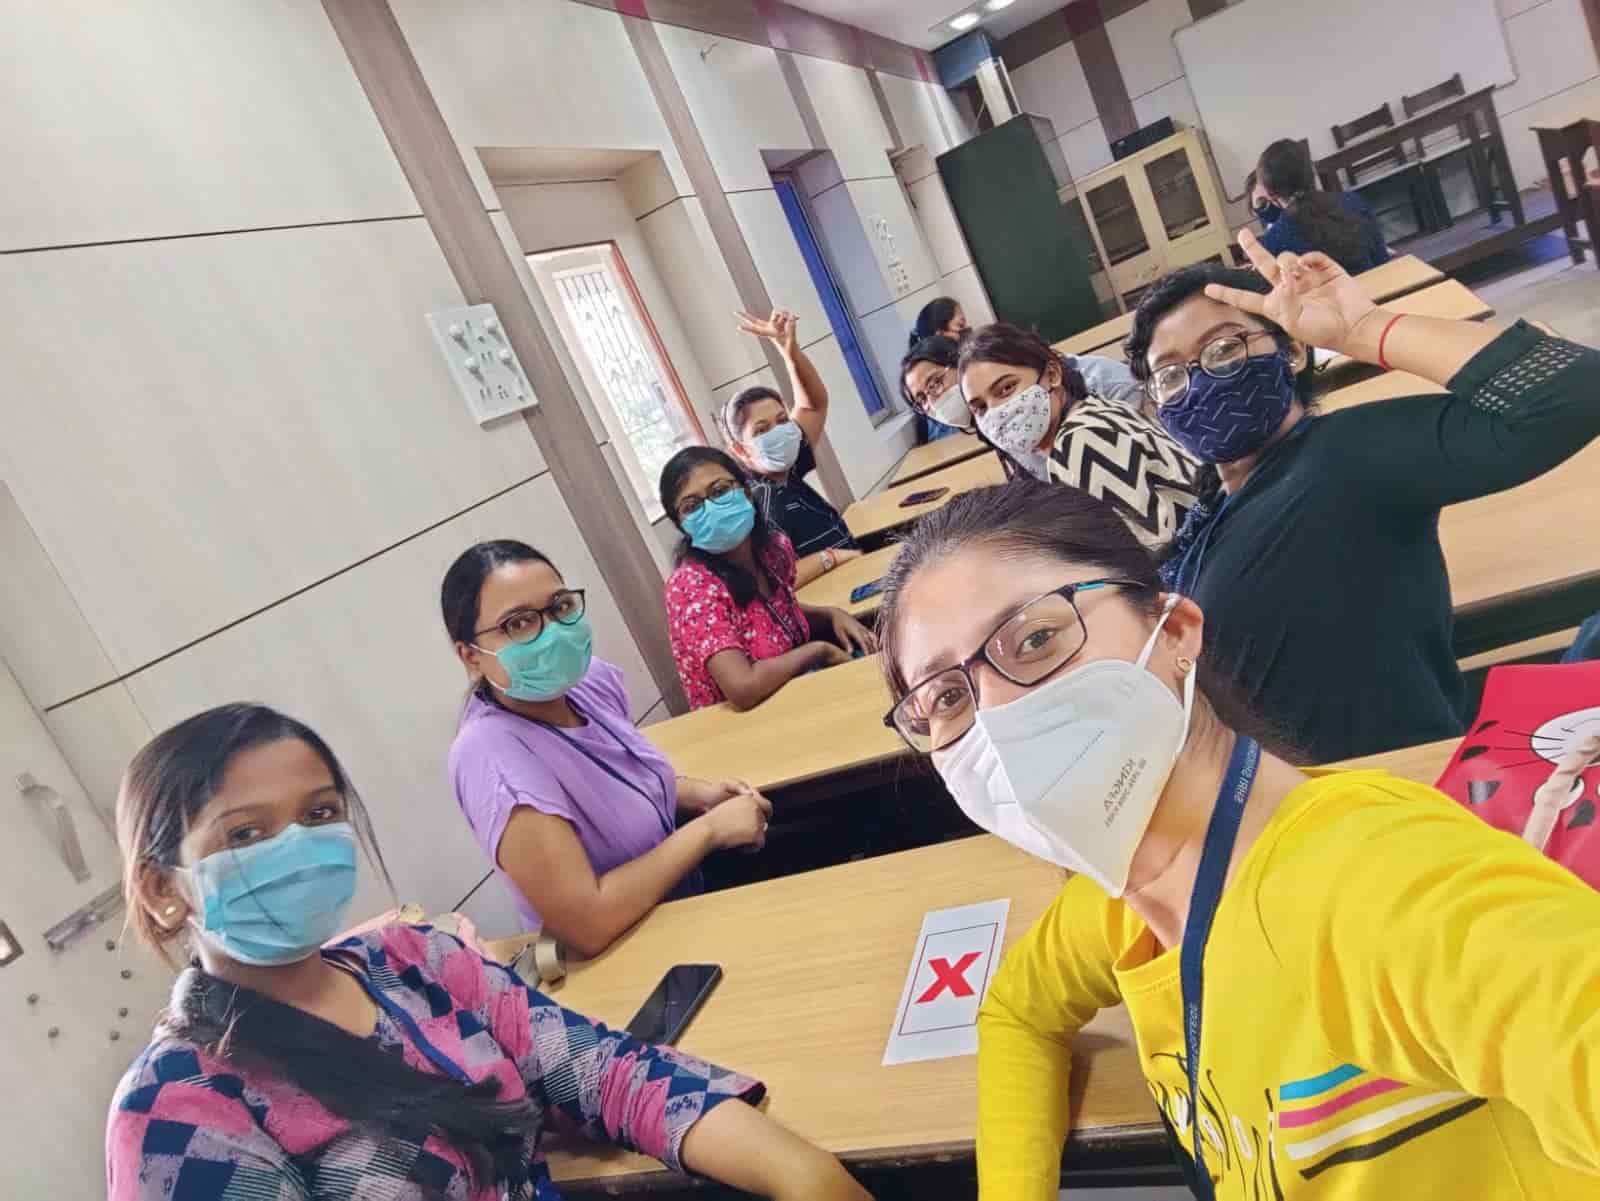 Smiles behind masks, students of Shri Shikshayatan College Journalism and Mass Communication department all geared up to attend classes.  